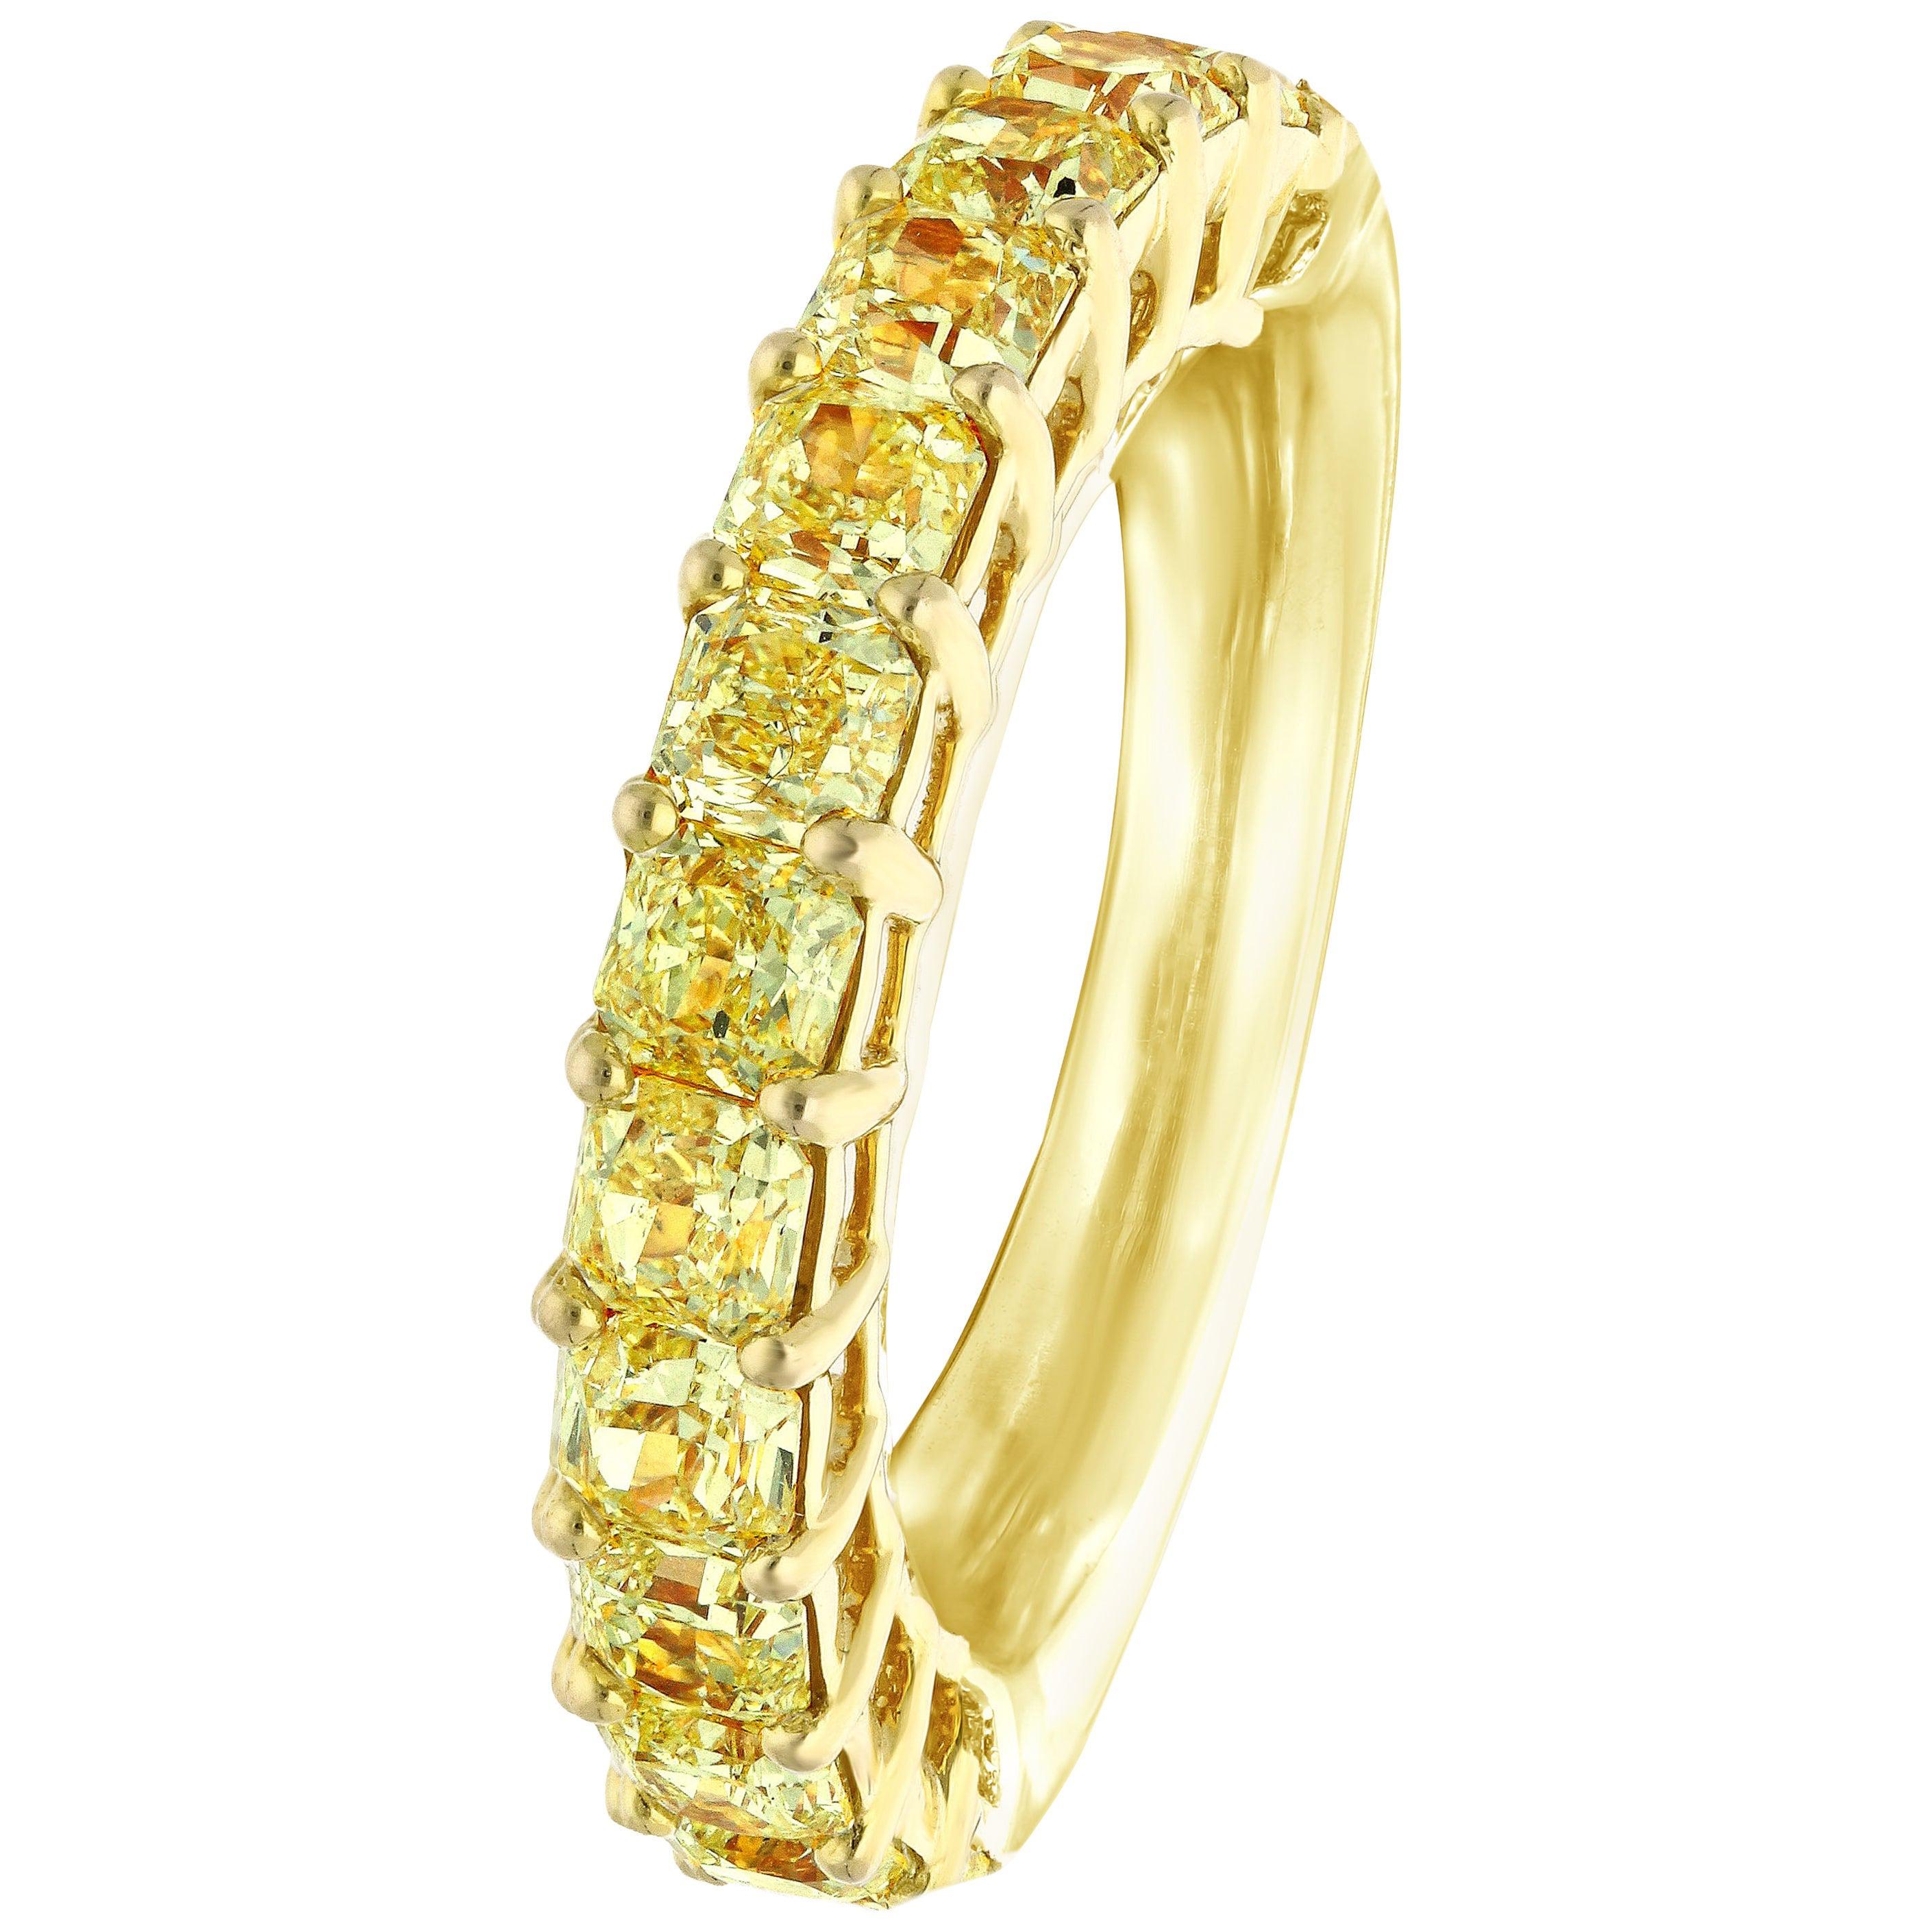 For Sale:  Classic Yellow Half Eternity Band, 3.05 Carat